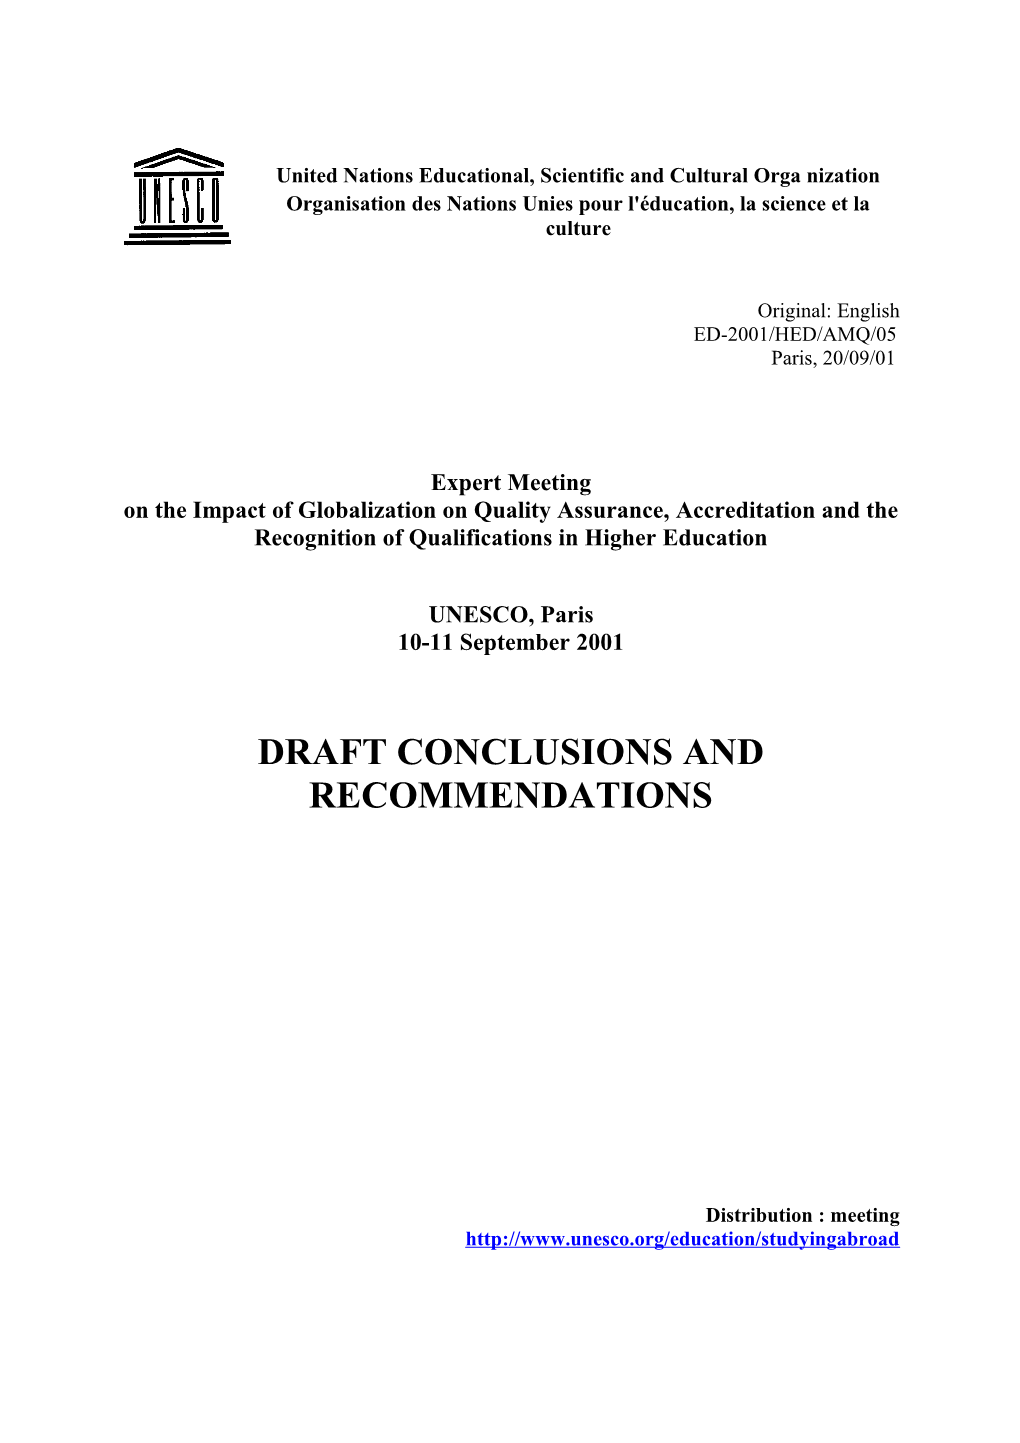 Draft Conclusions and Recommendations